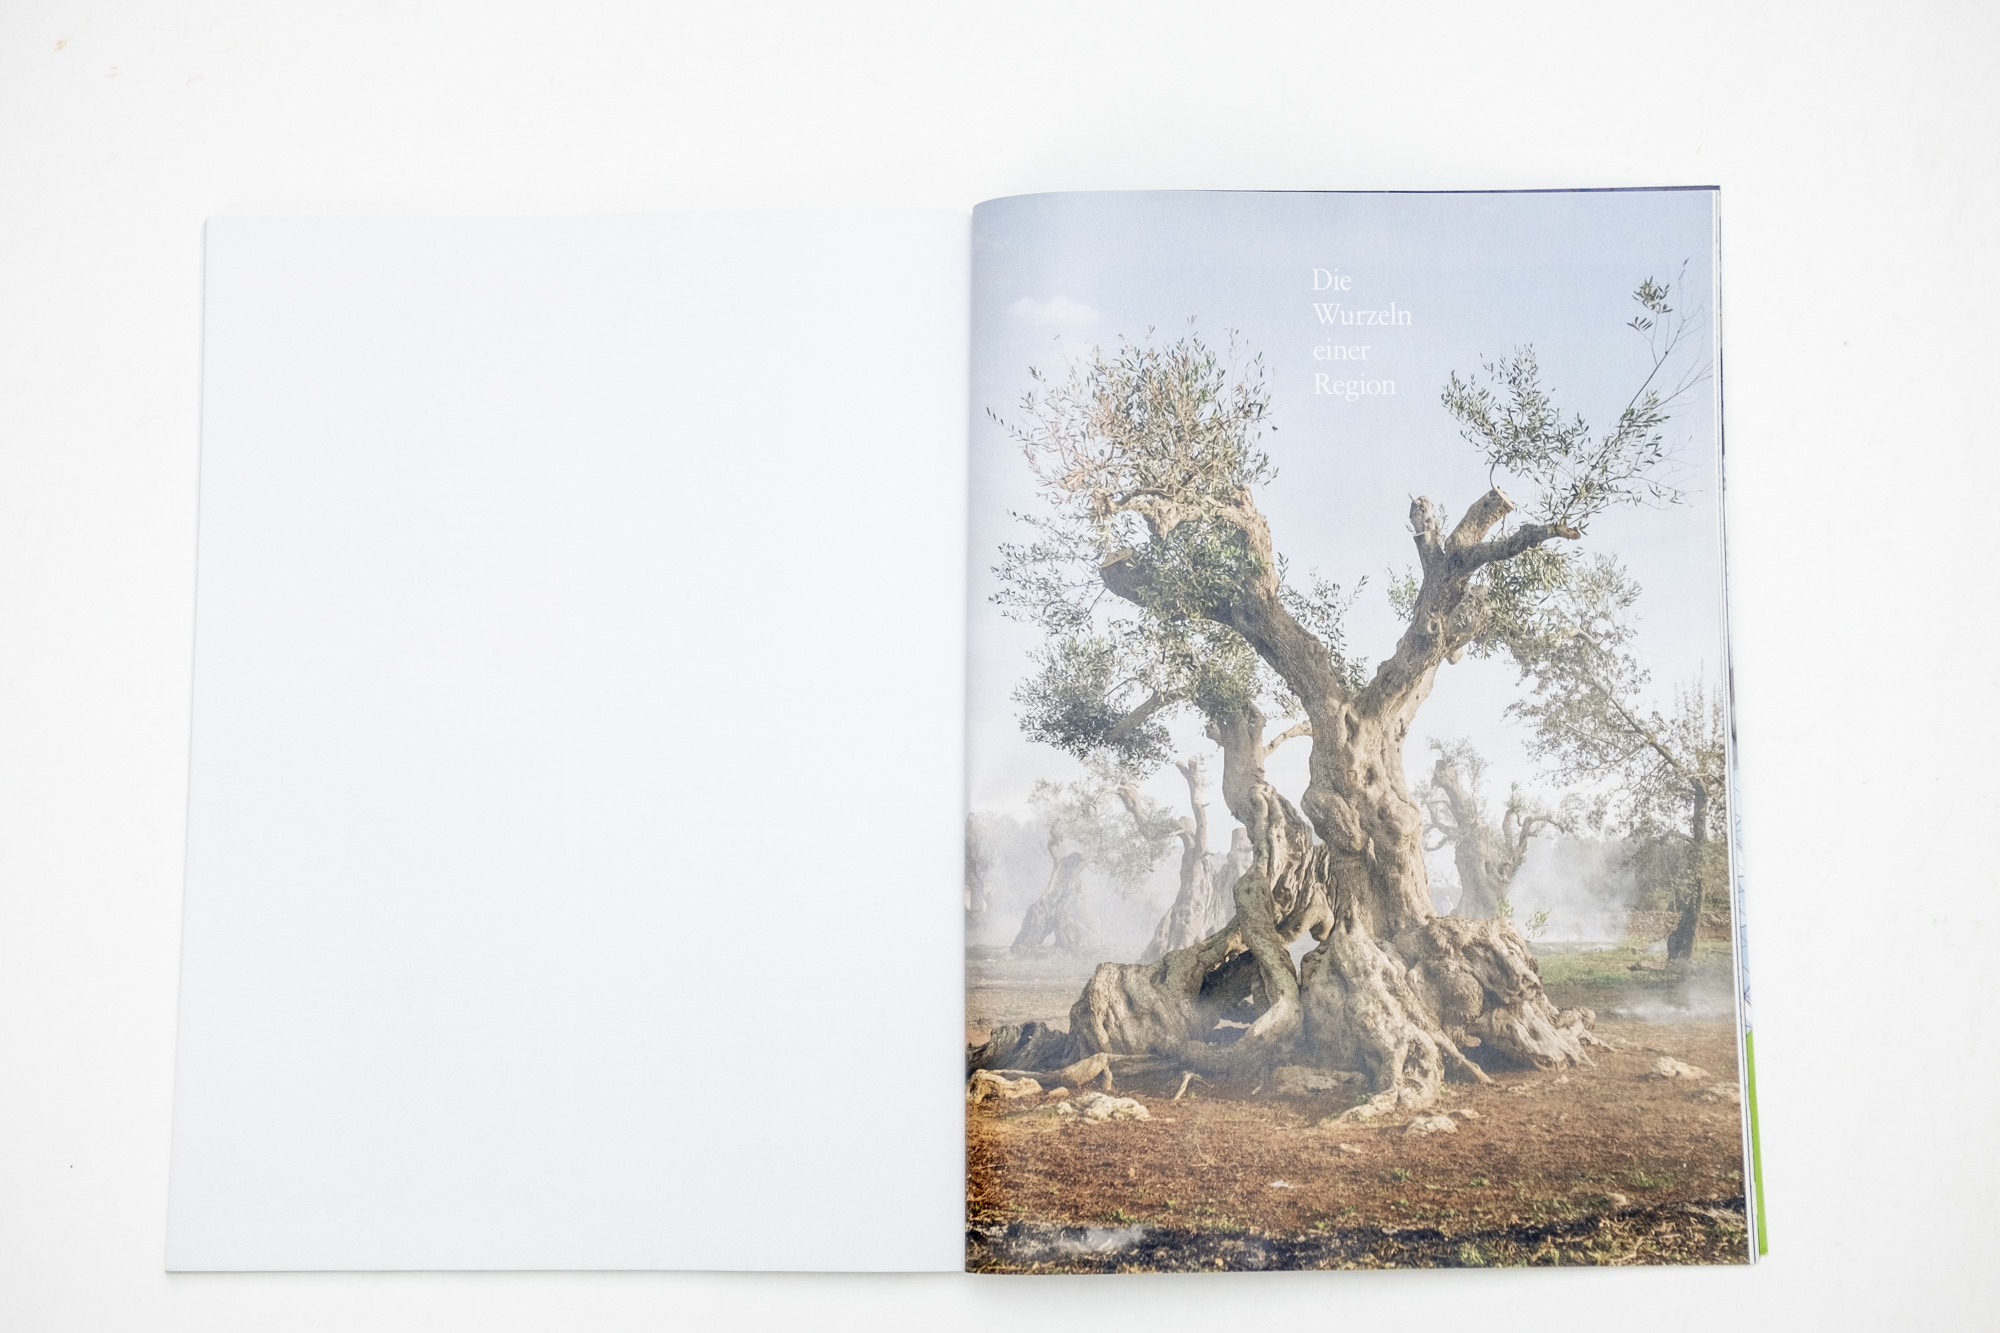 Magazine spread of publication "My father is in these trees" in brand eins magazine 06/2018